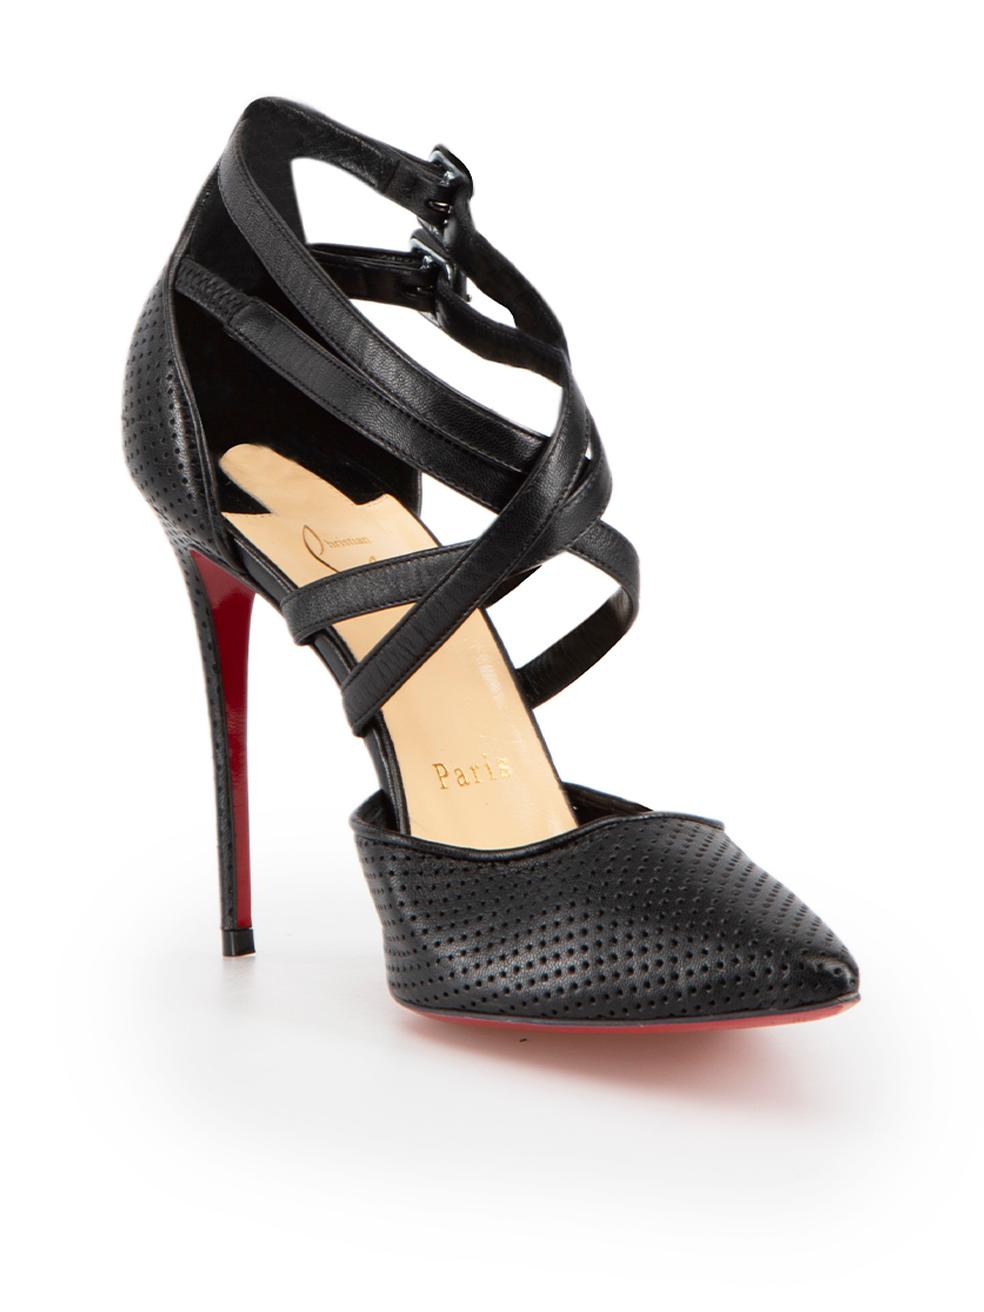 CONDITION is Very good. Minimal wear to heels is evident. Minimal wear to uppers where some creasing and a small scuff at the right toe is seen. Light abrasion also seen through the outsoles on this used Christian Louboutin designer resale item.
 
